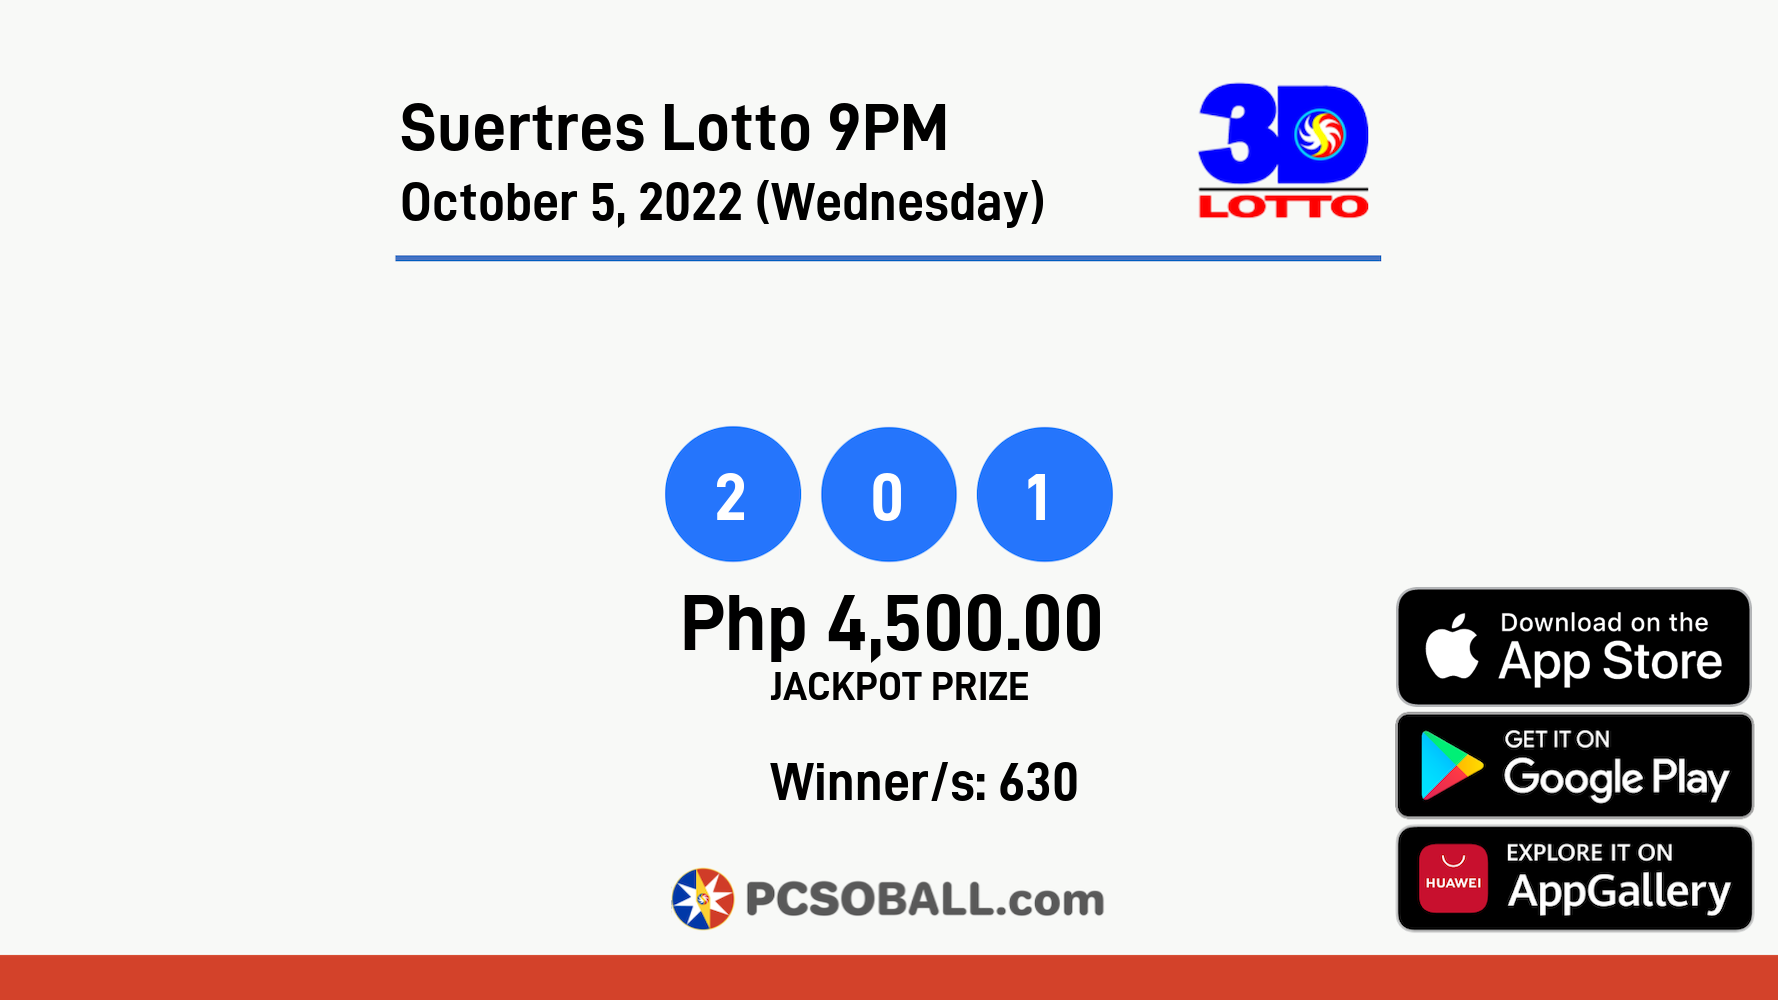 Suertres Lotto 9PM October 5, 2022 (Wednesday) Result